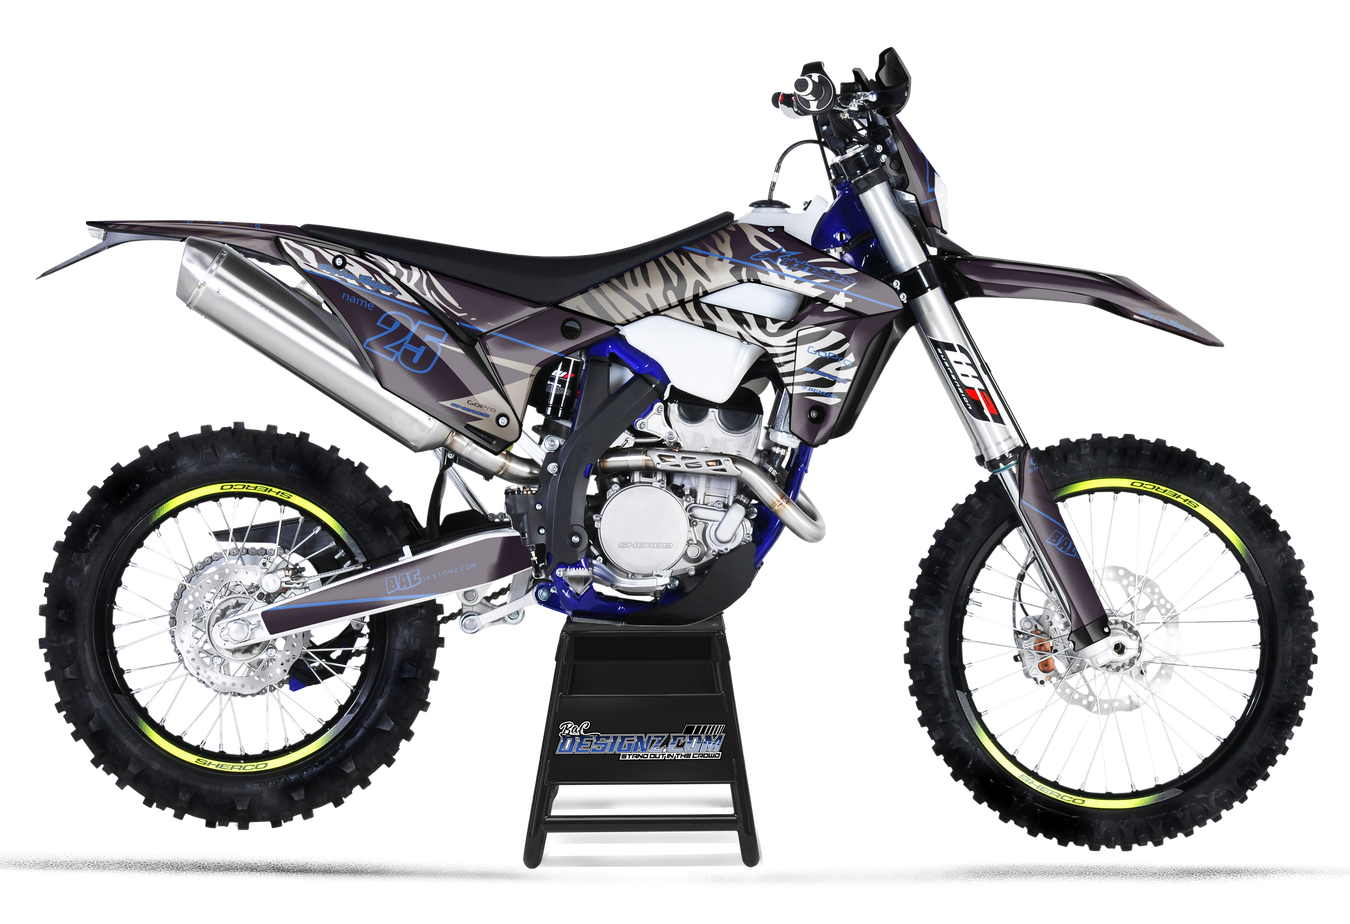 Sherco Decals & Graphic kits